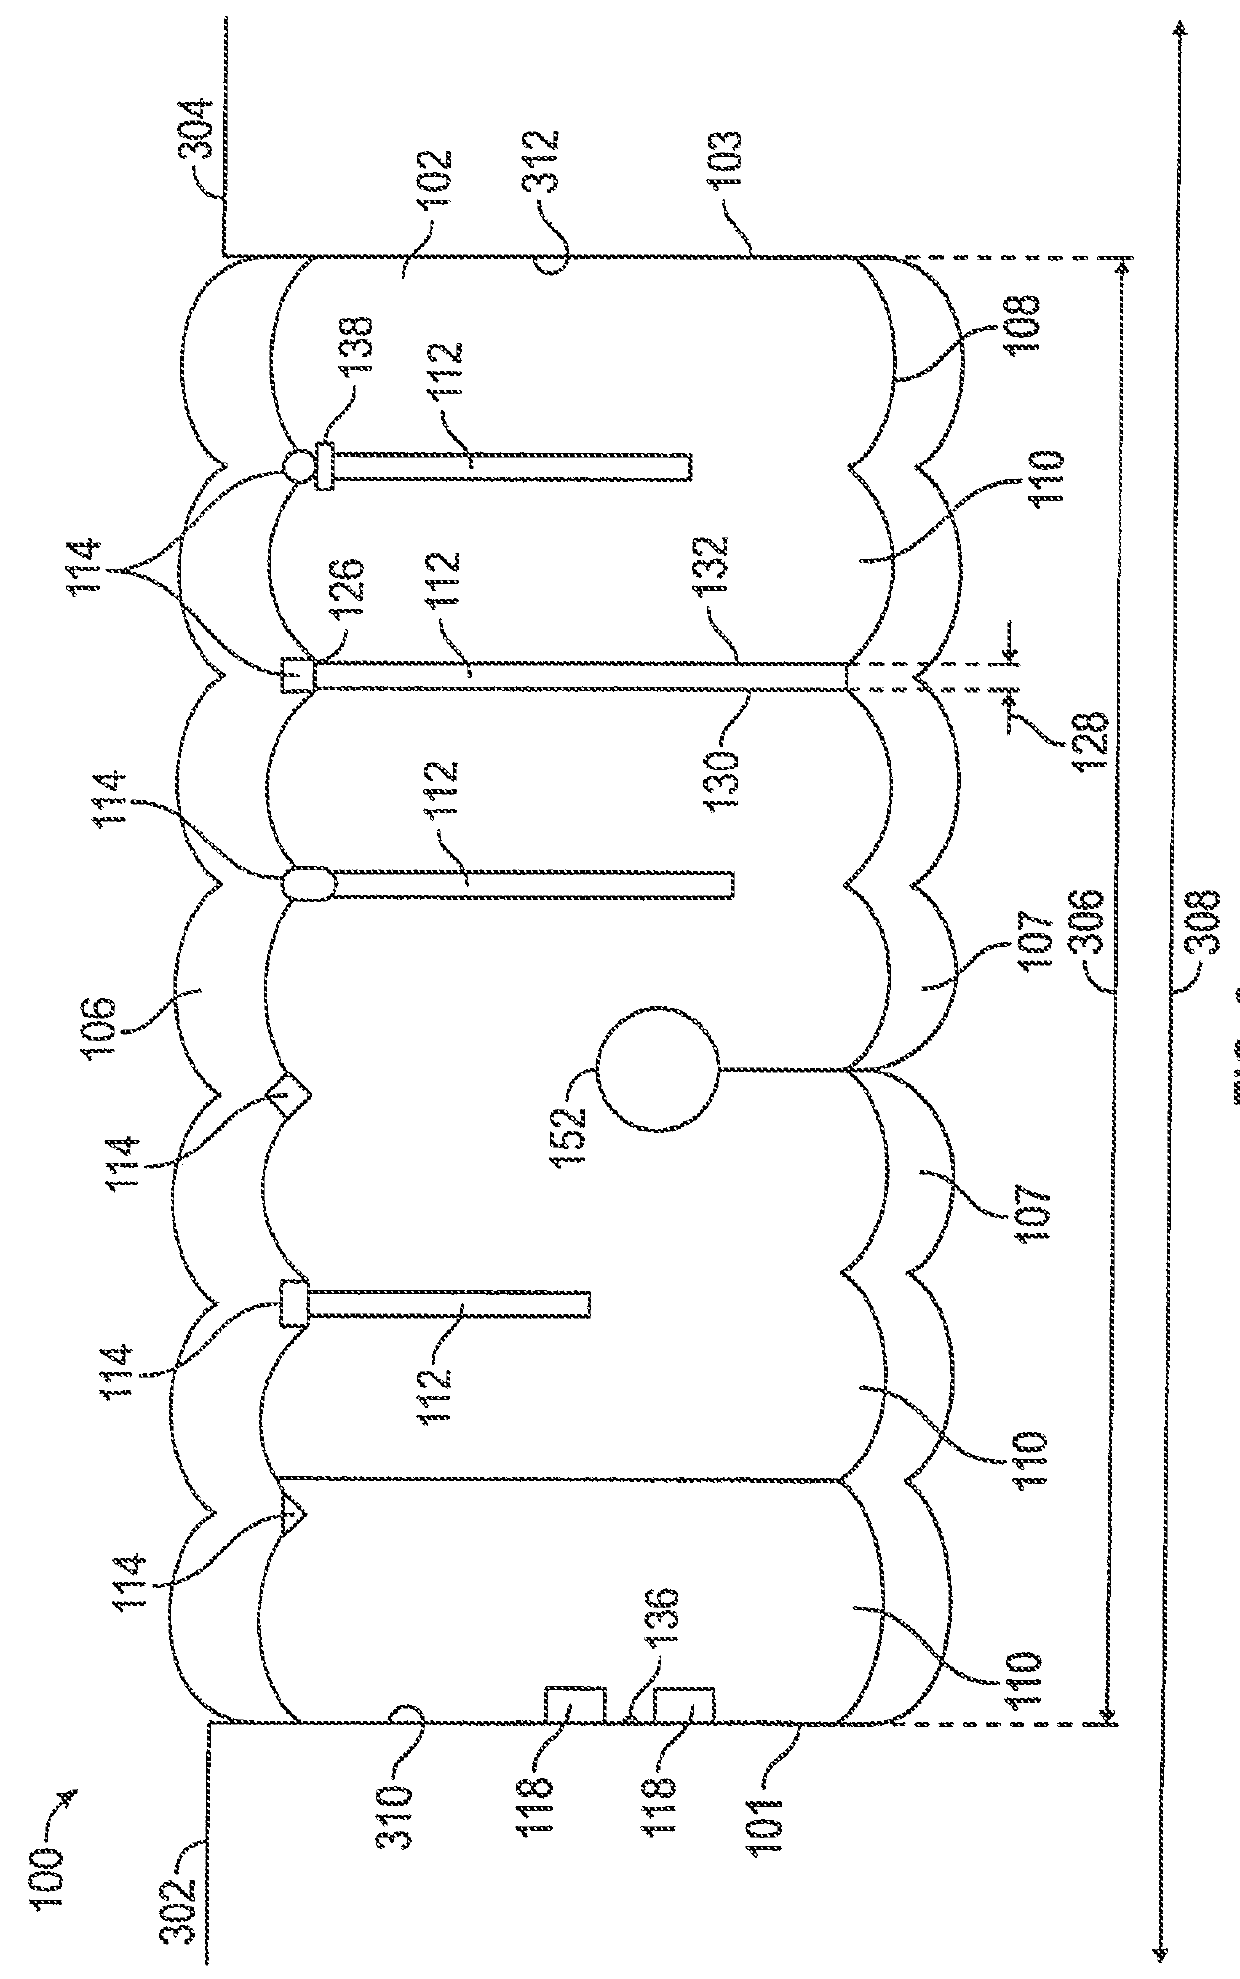 Expansion Joint Seal with surface load transfer, intumescent, and internal sensor